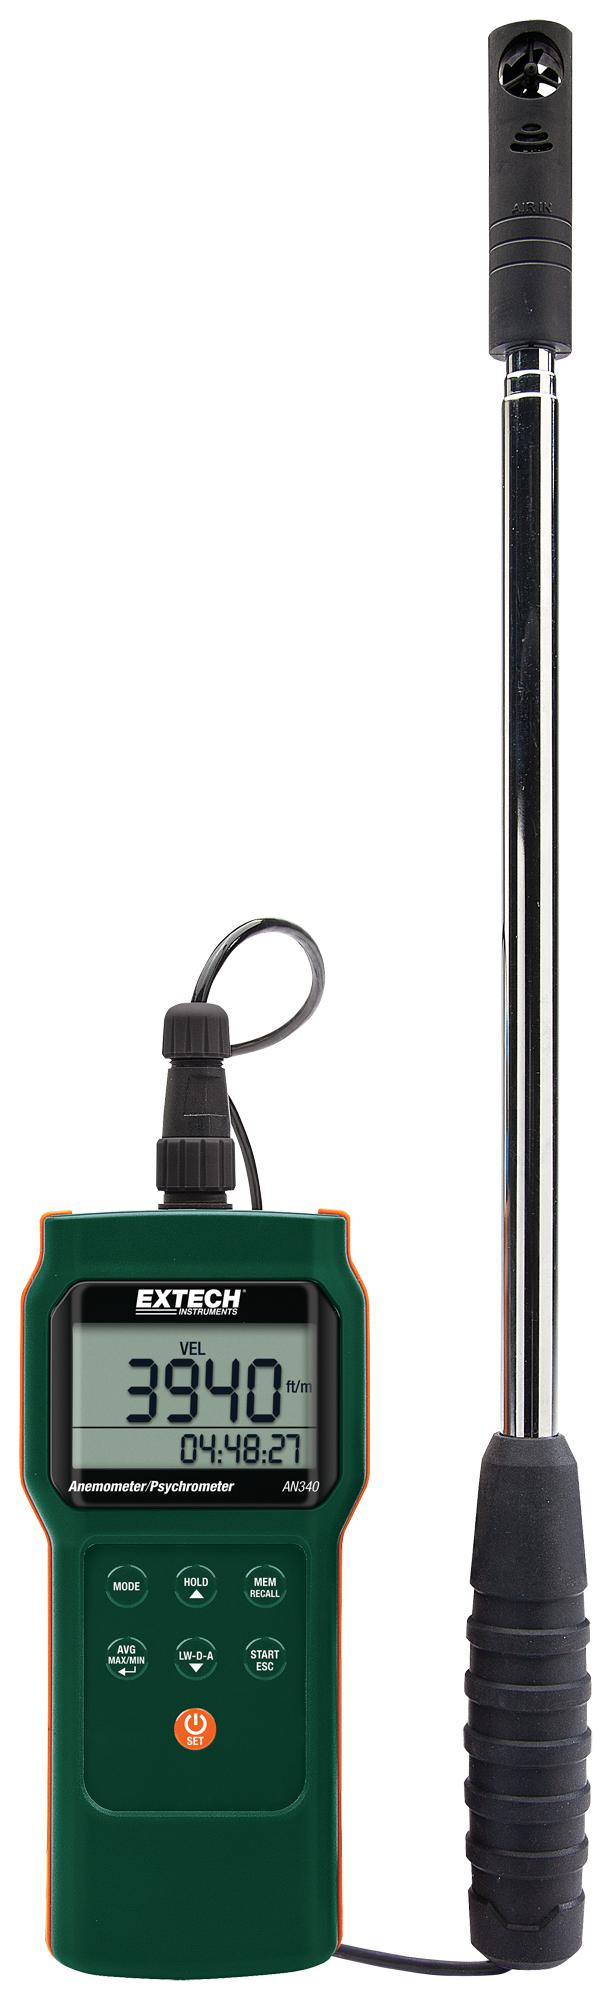 AN340 ANEMOMETER/PSYCHROMETER LOGGER, 20M/S EXTECH INSTRUMENTS